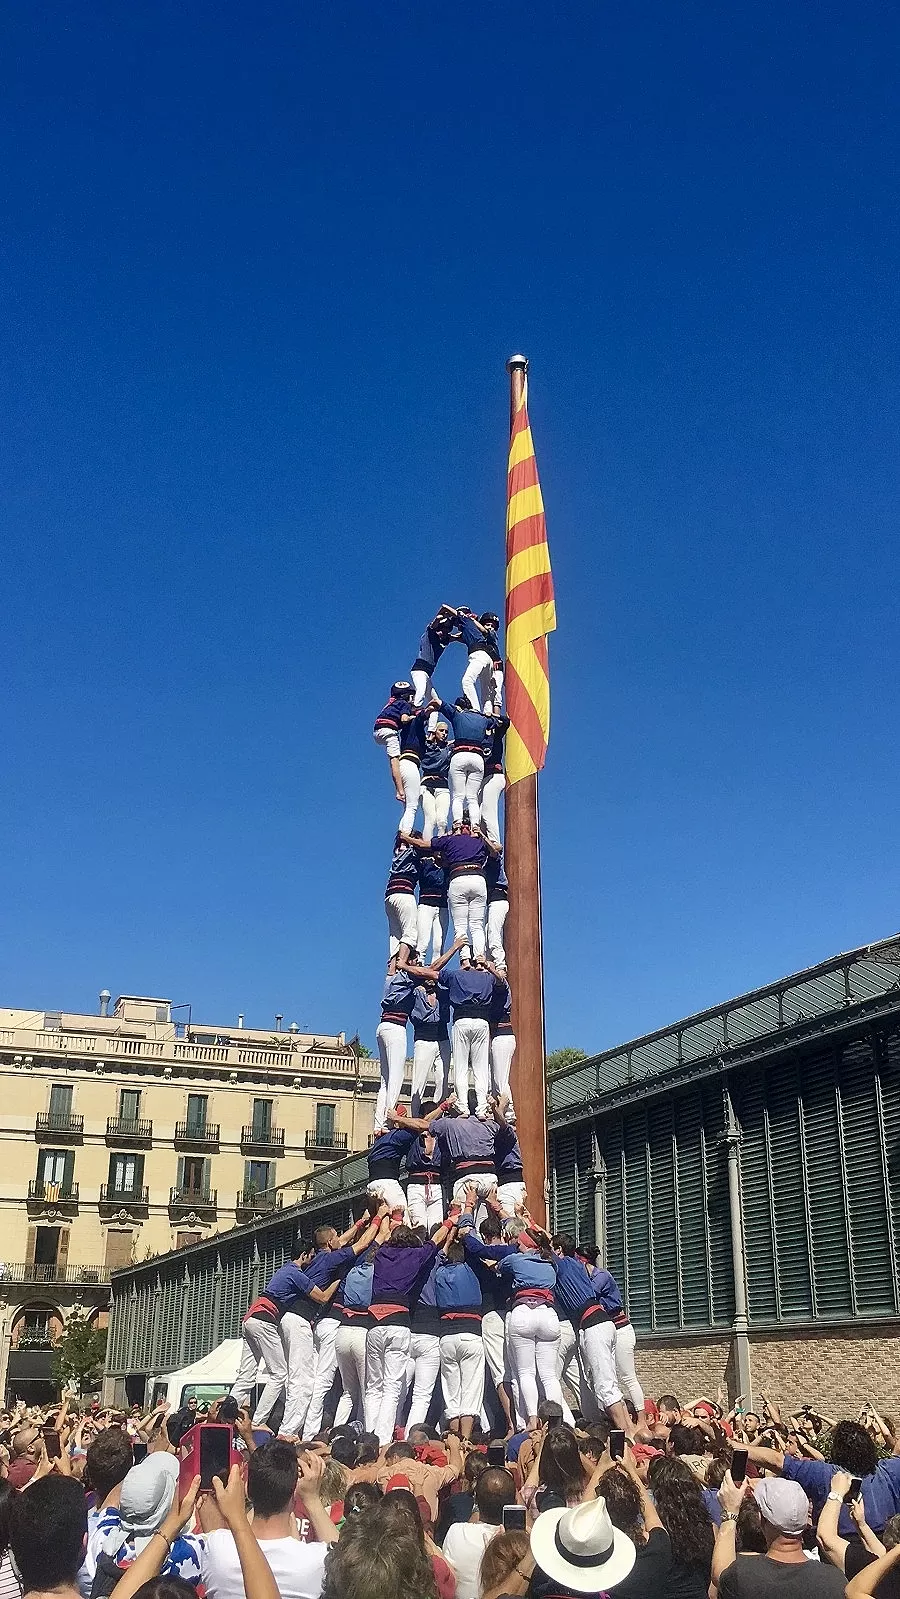 Castellers building a human tower in el Born, Barcelona